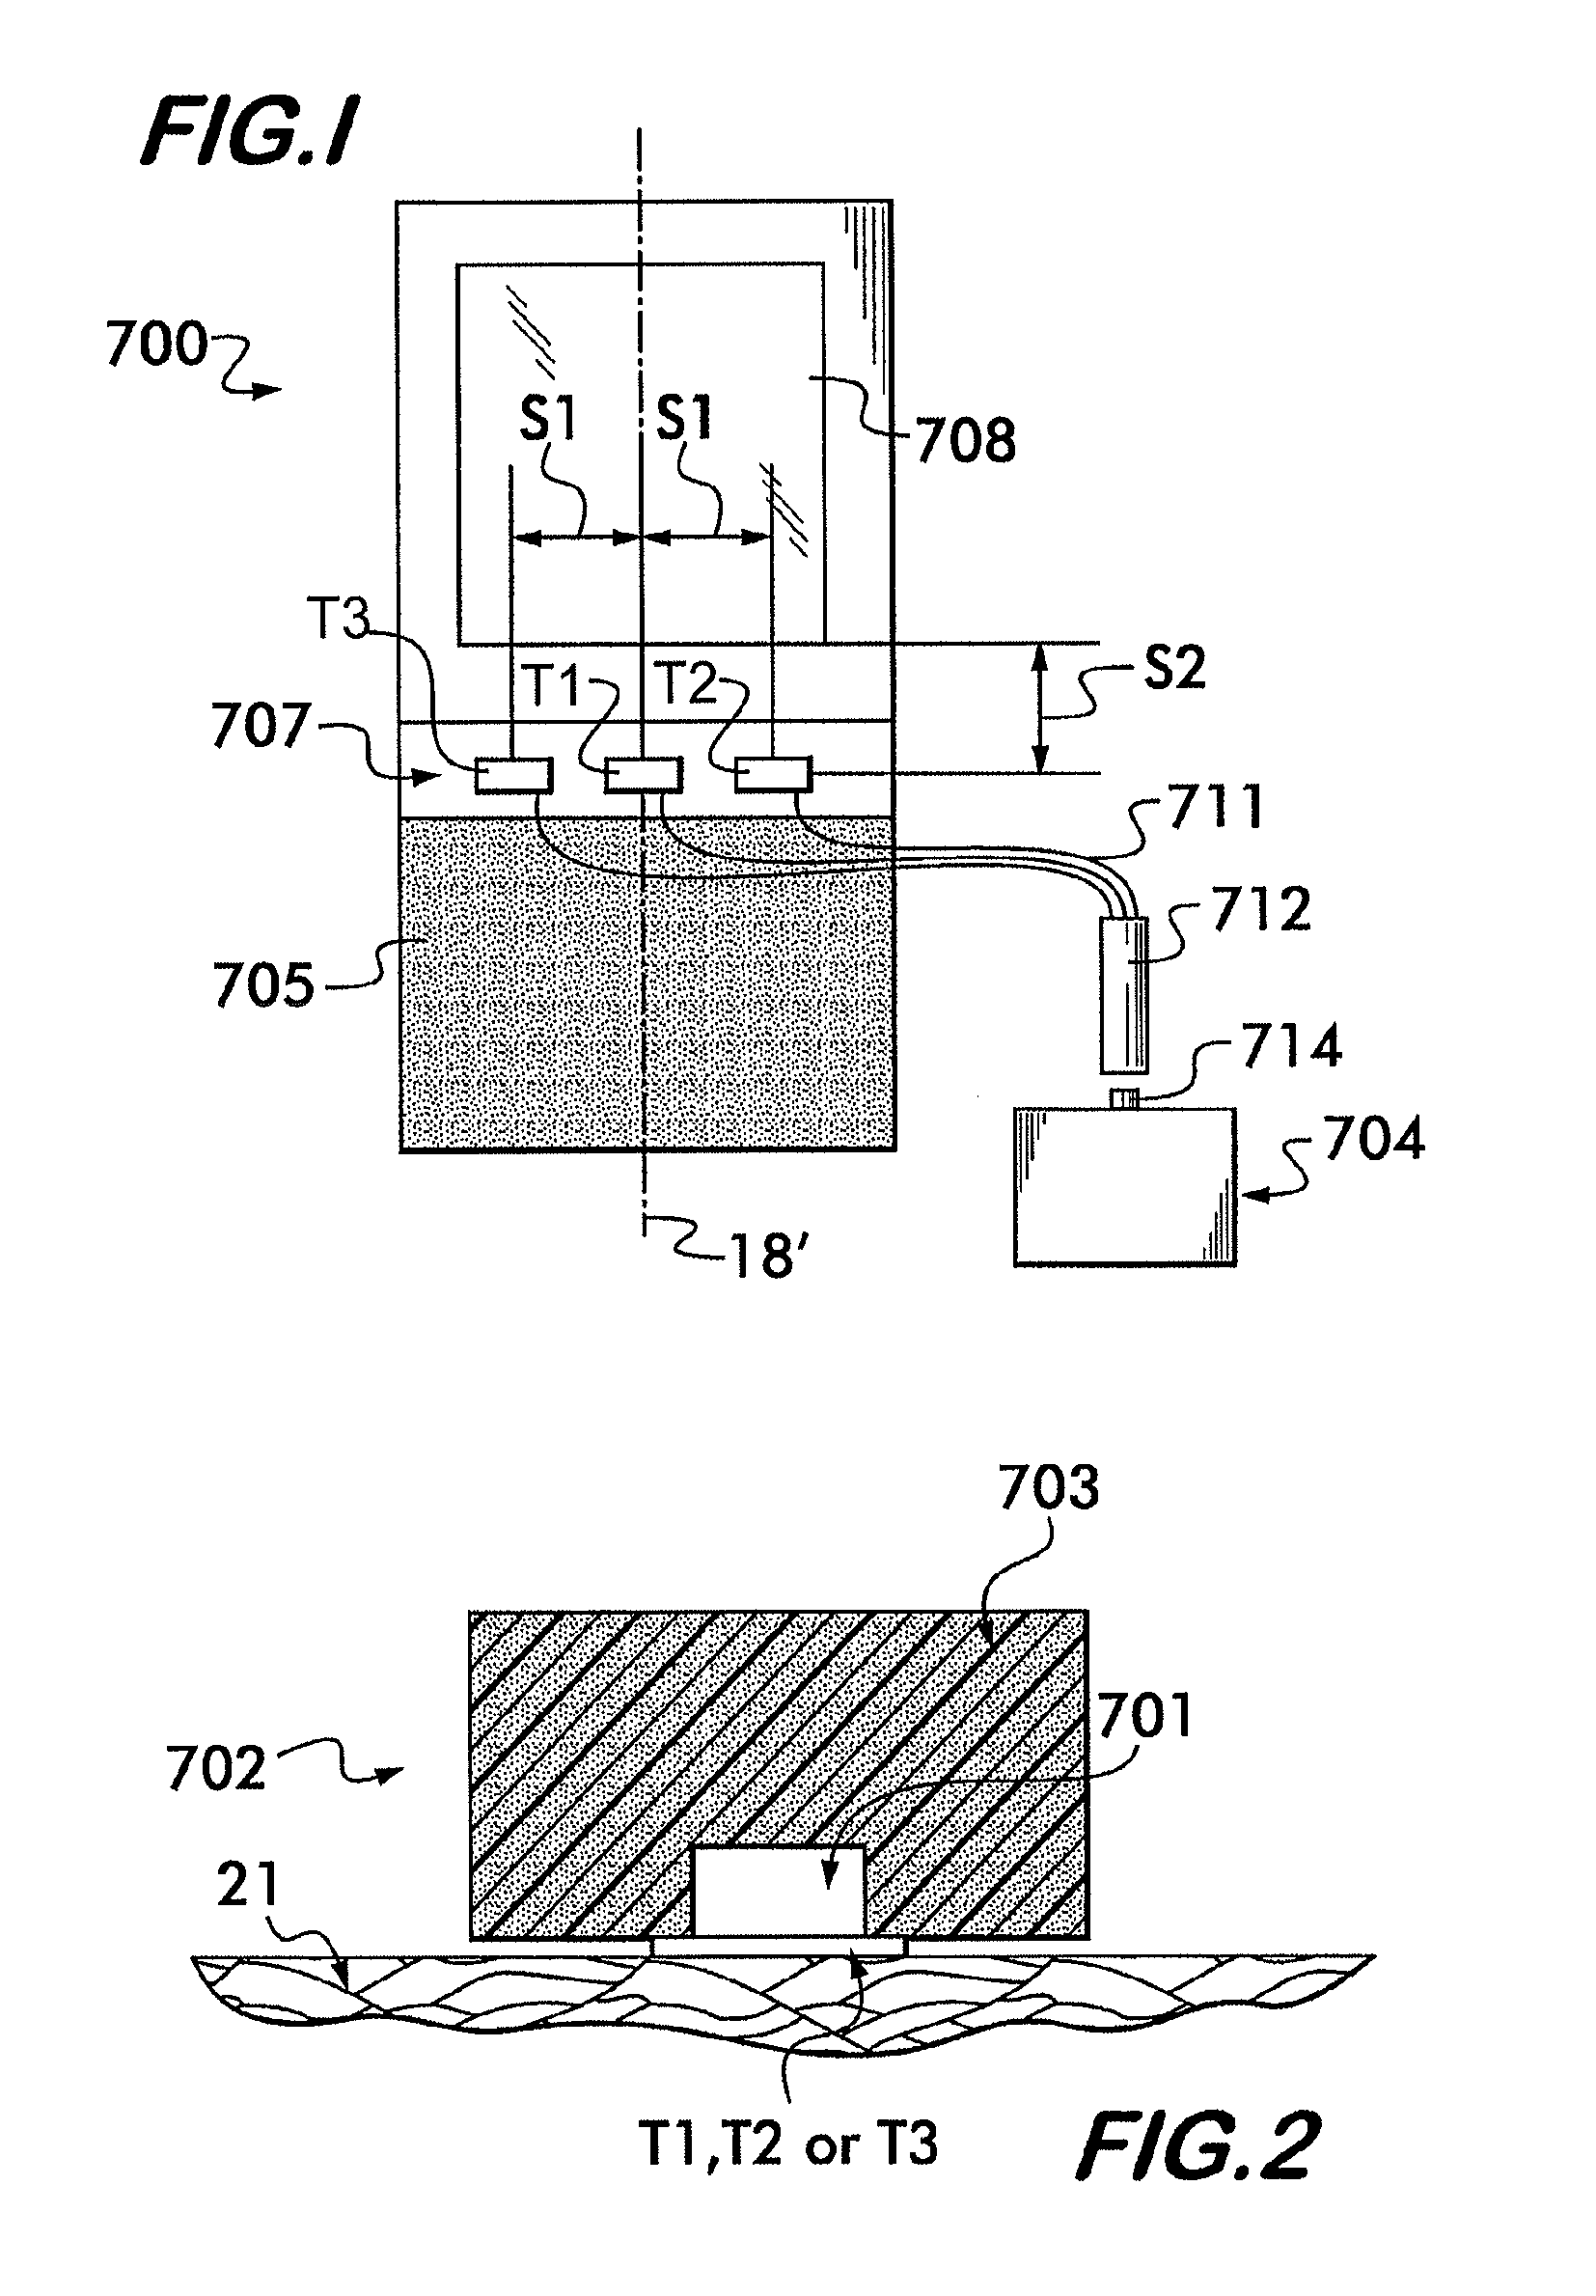 Cerebrospinal fluid evaluation system having thermal flow and flow rate measurement pad using a plurality of control sensors